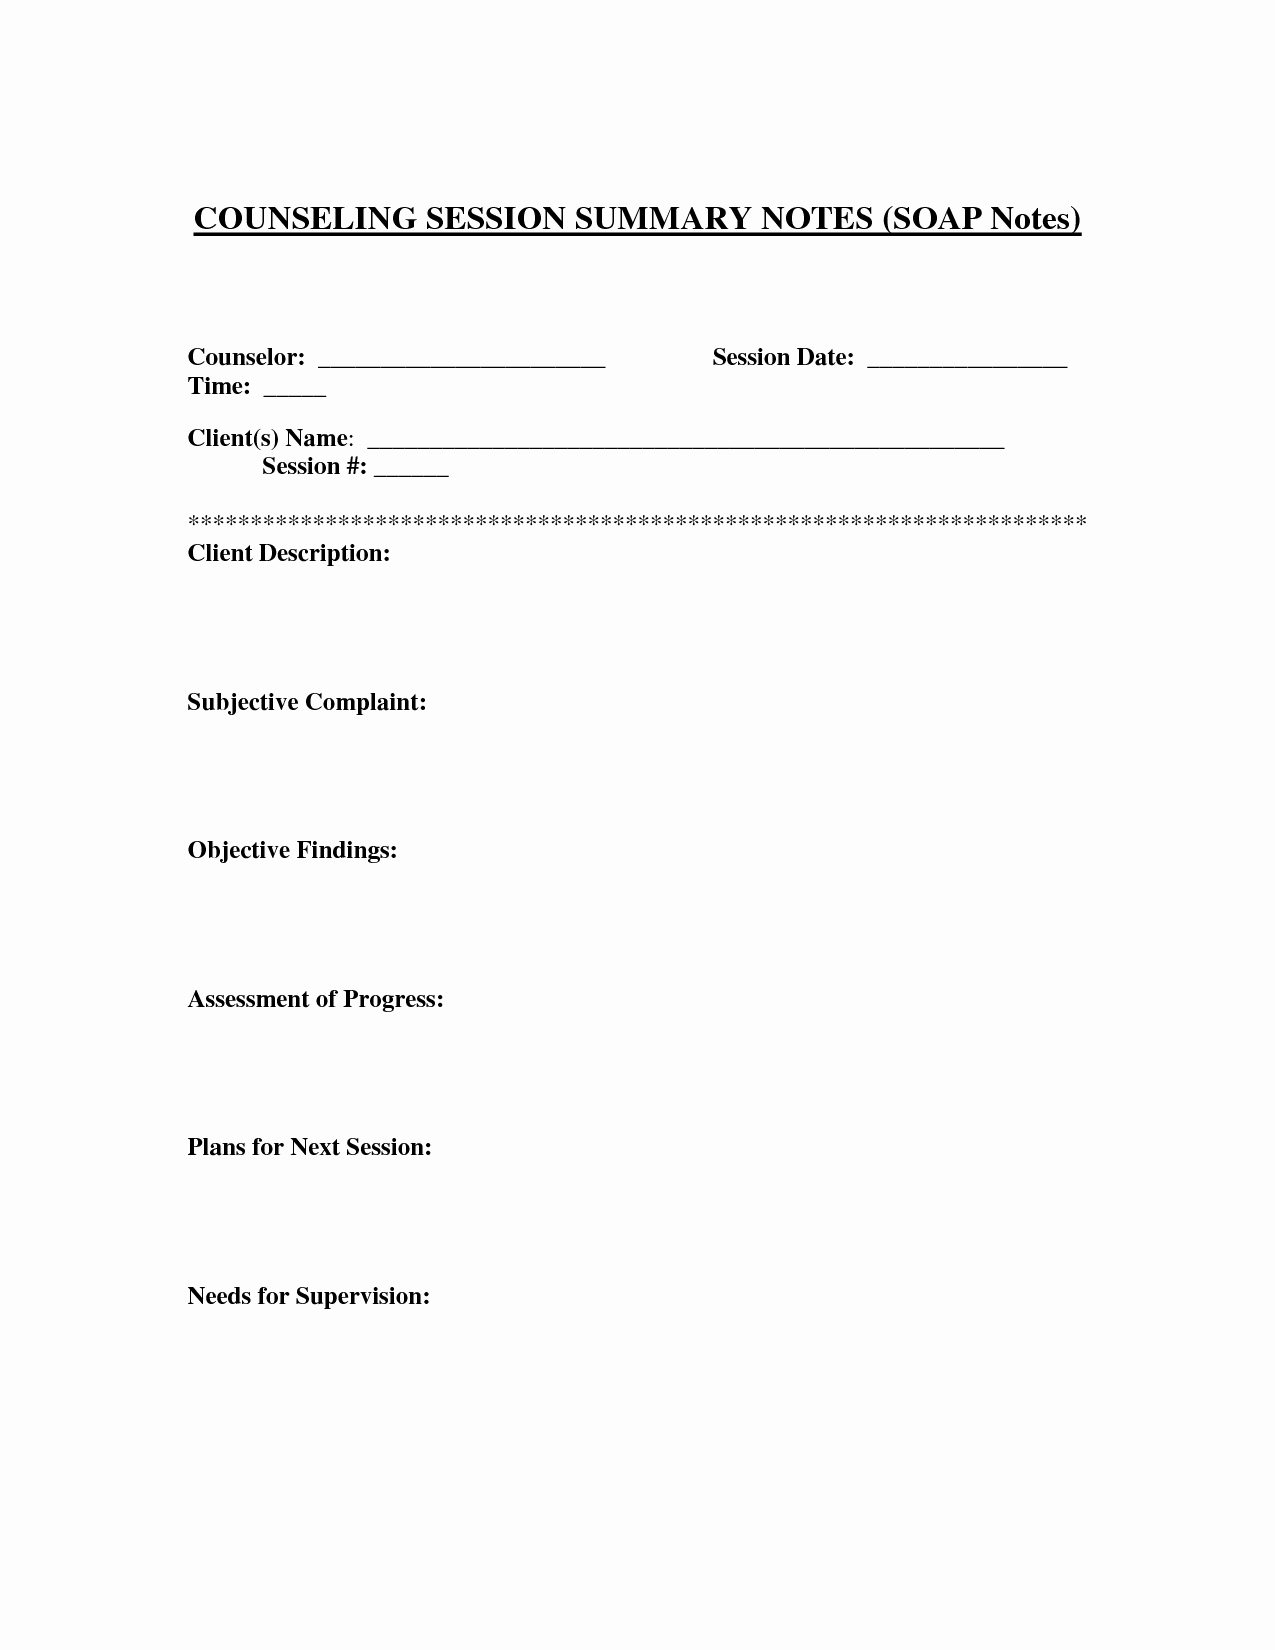 Soap Note Template Counseling Best Of soap Notes Template for Counseling Google Search